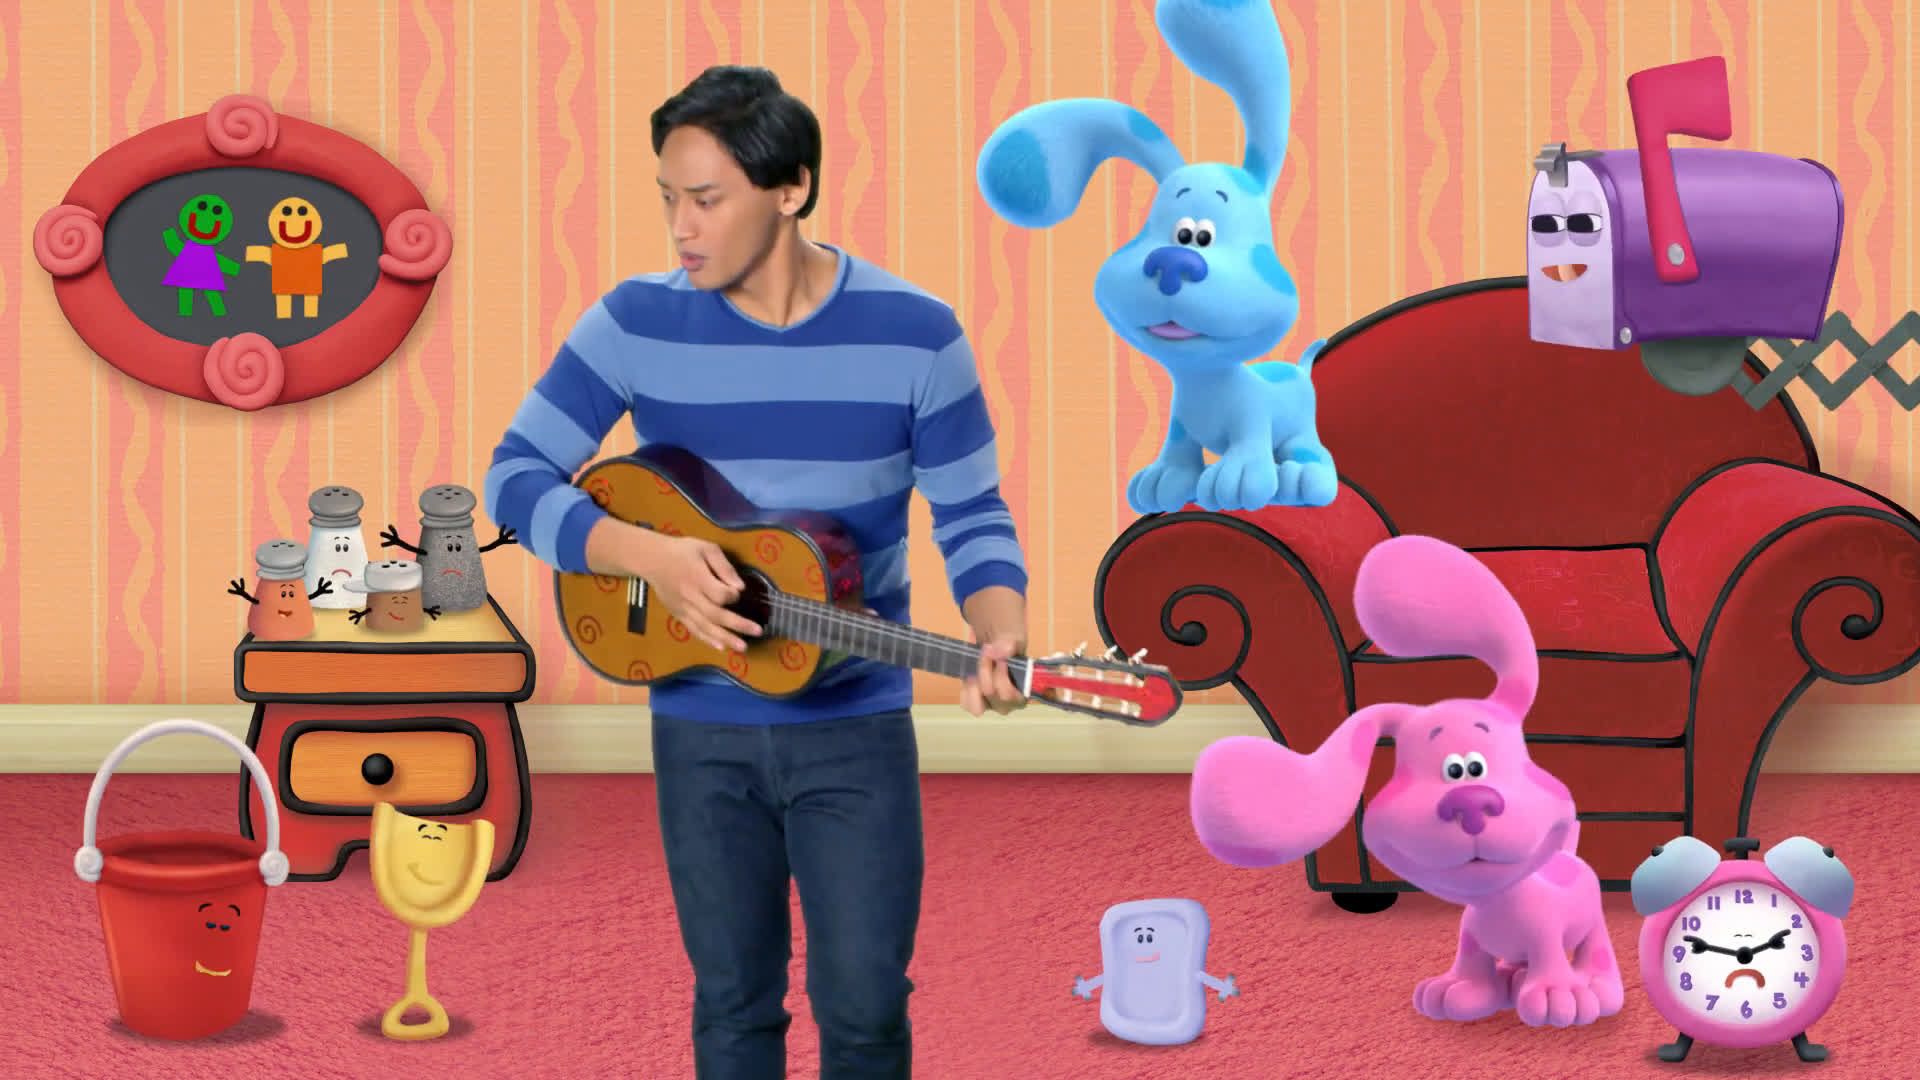 Blue's Clues & You! Wallpapers - Wallpaper Cave